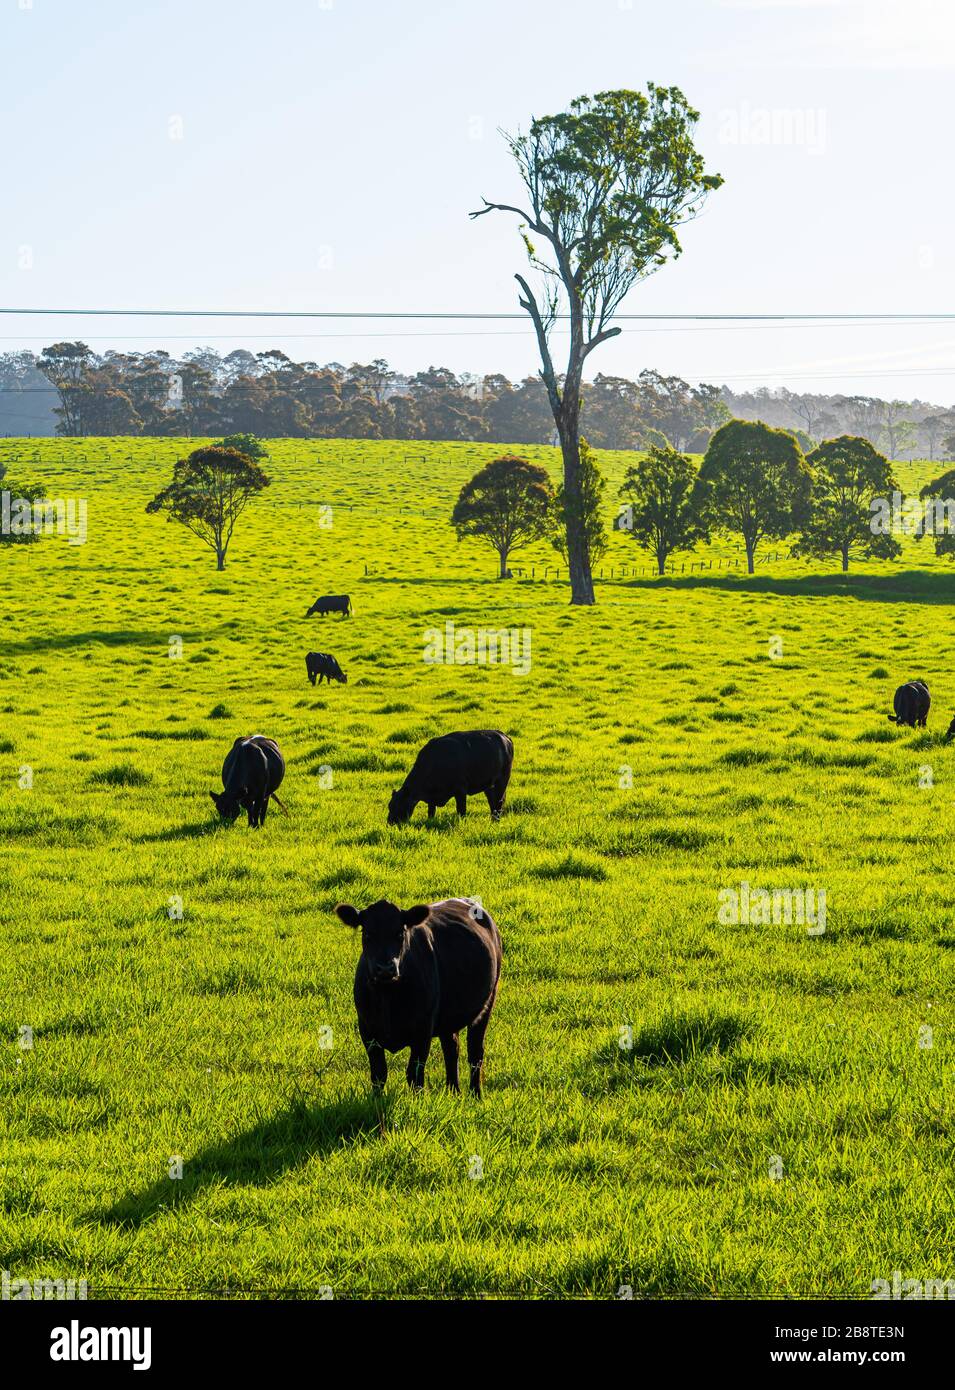 Cattle graze on fresh grass after recent rain in Southern NSW, Australia Stock Photo